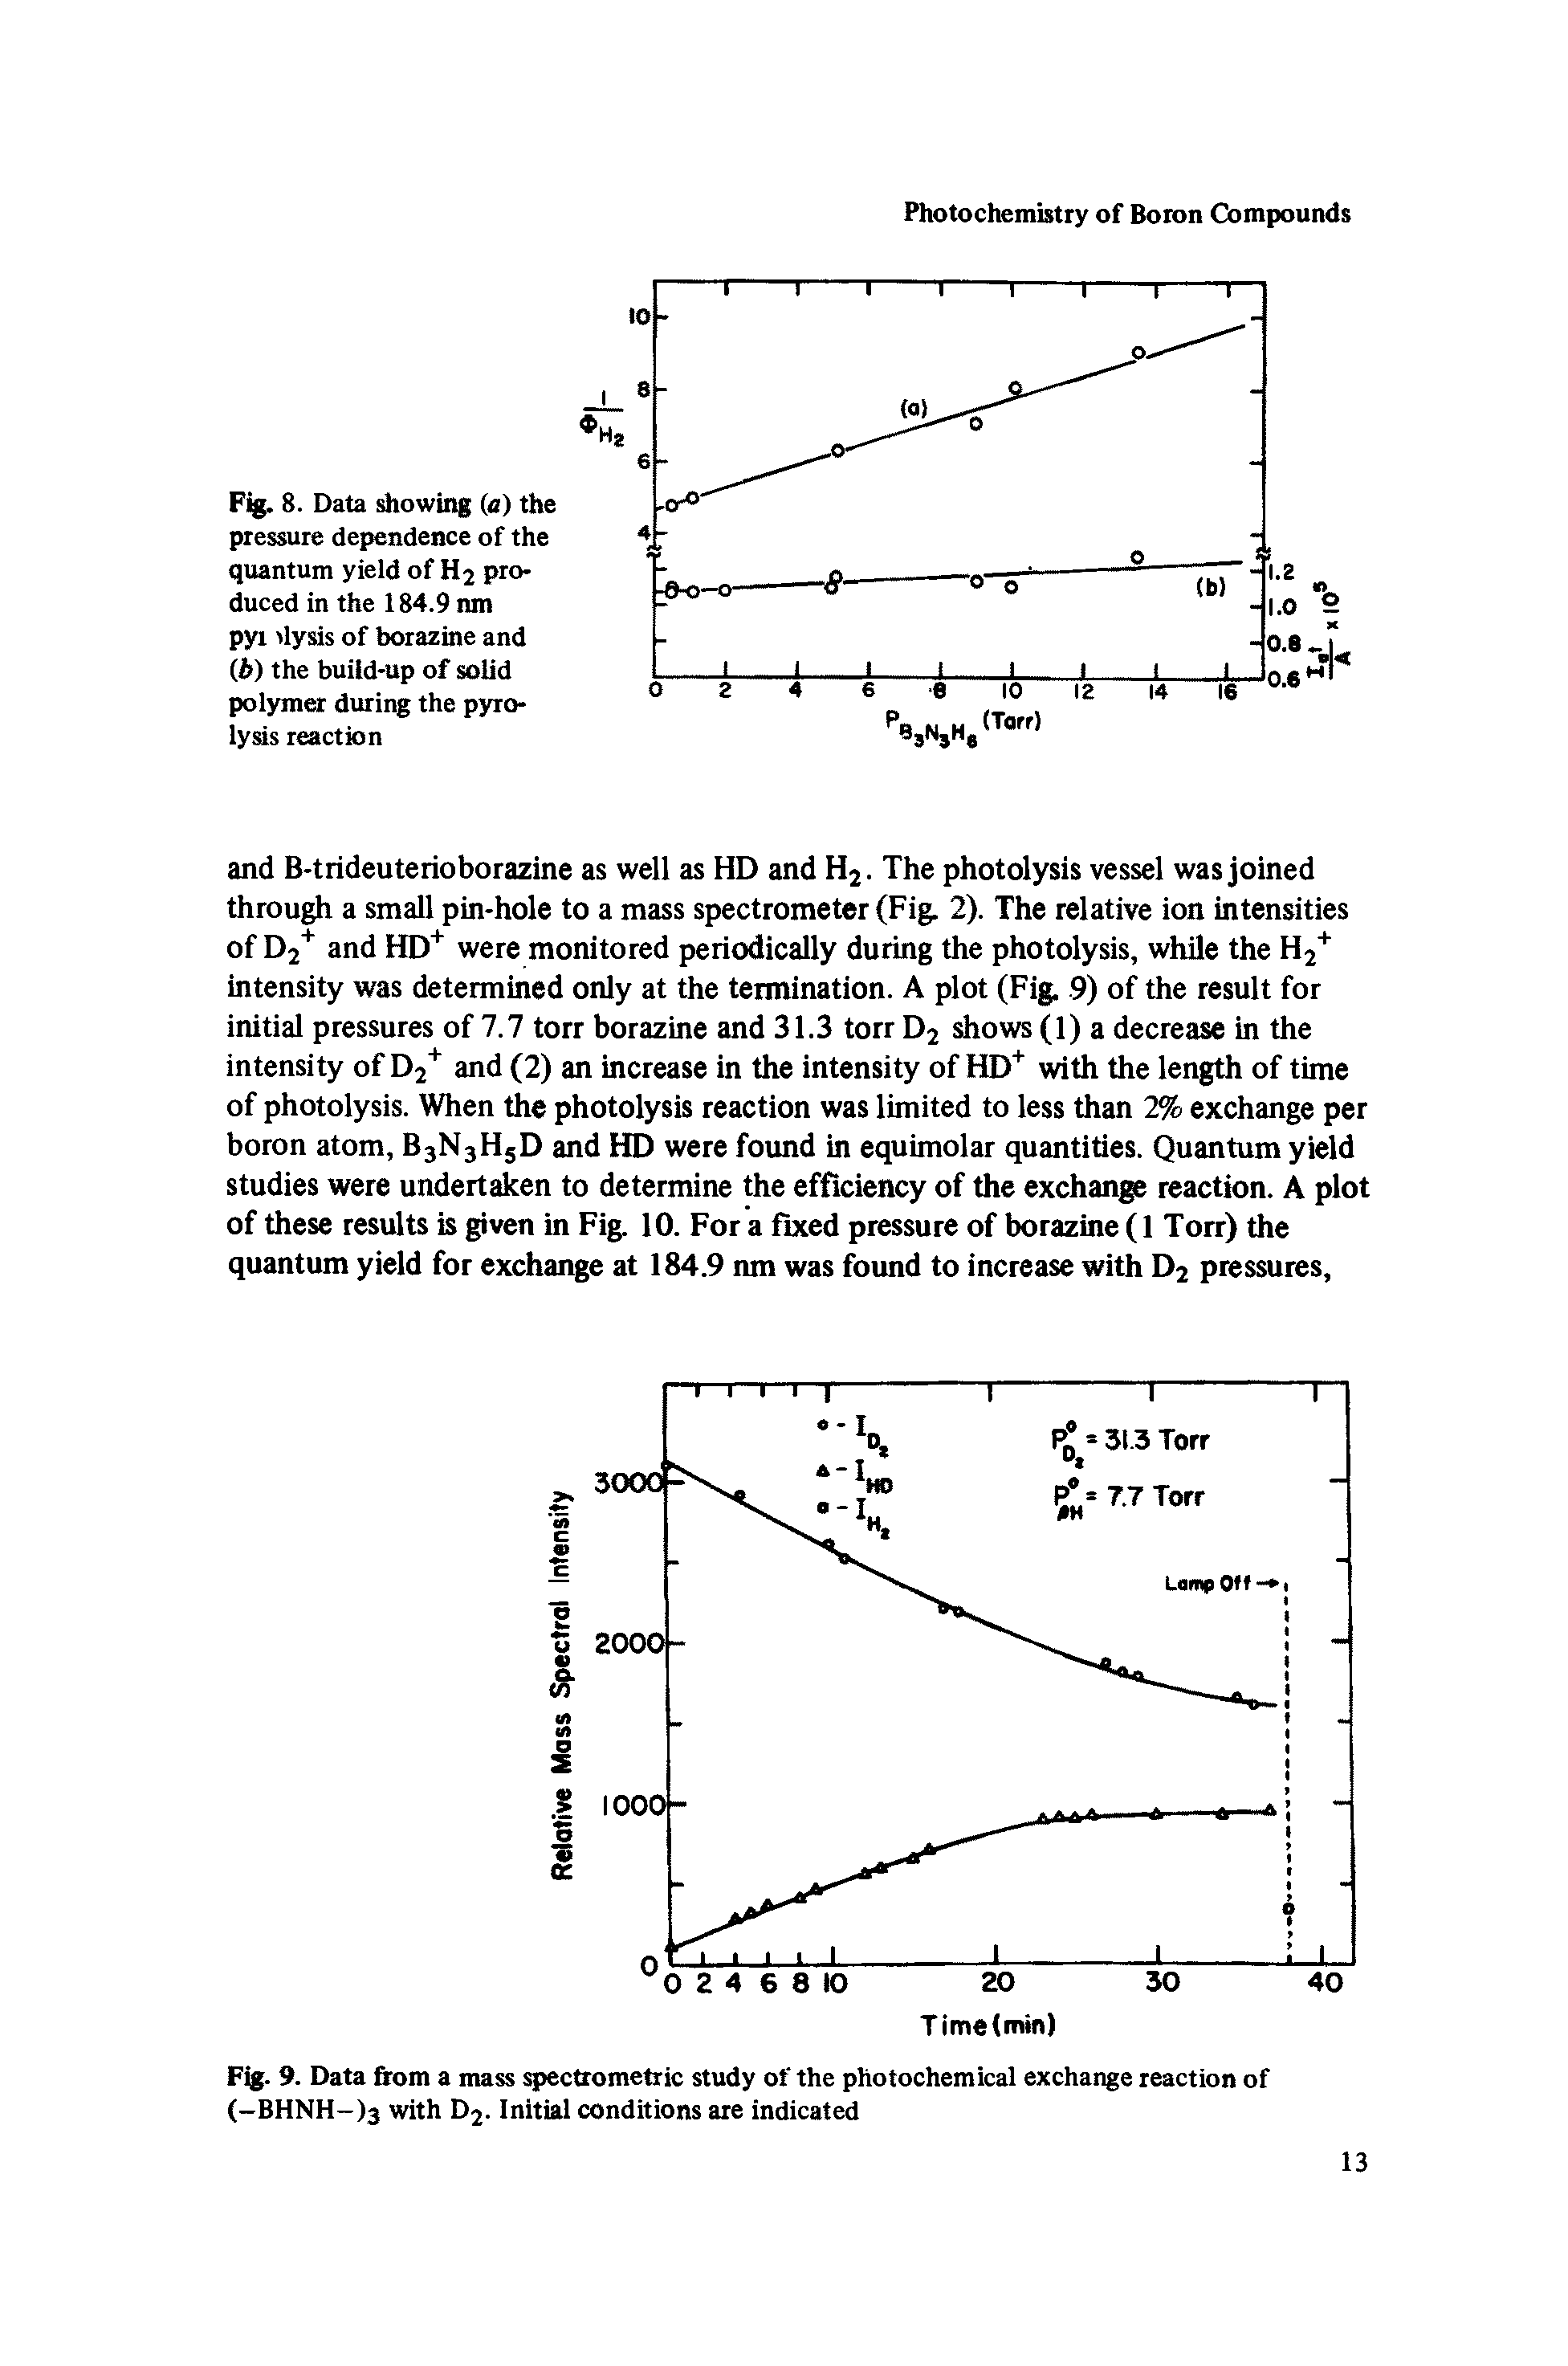 Fig. 8. Data showing (a) the pressure dependence of the quantum yield of H2 produced in the 184.9 nm pyi dysis of borazine and (b) the build-up of solid polymer during the pyrolysis reaction...